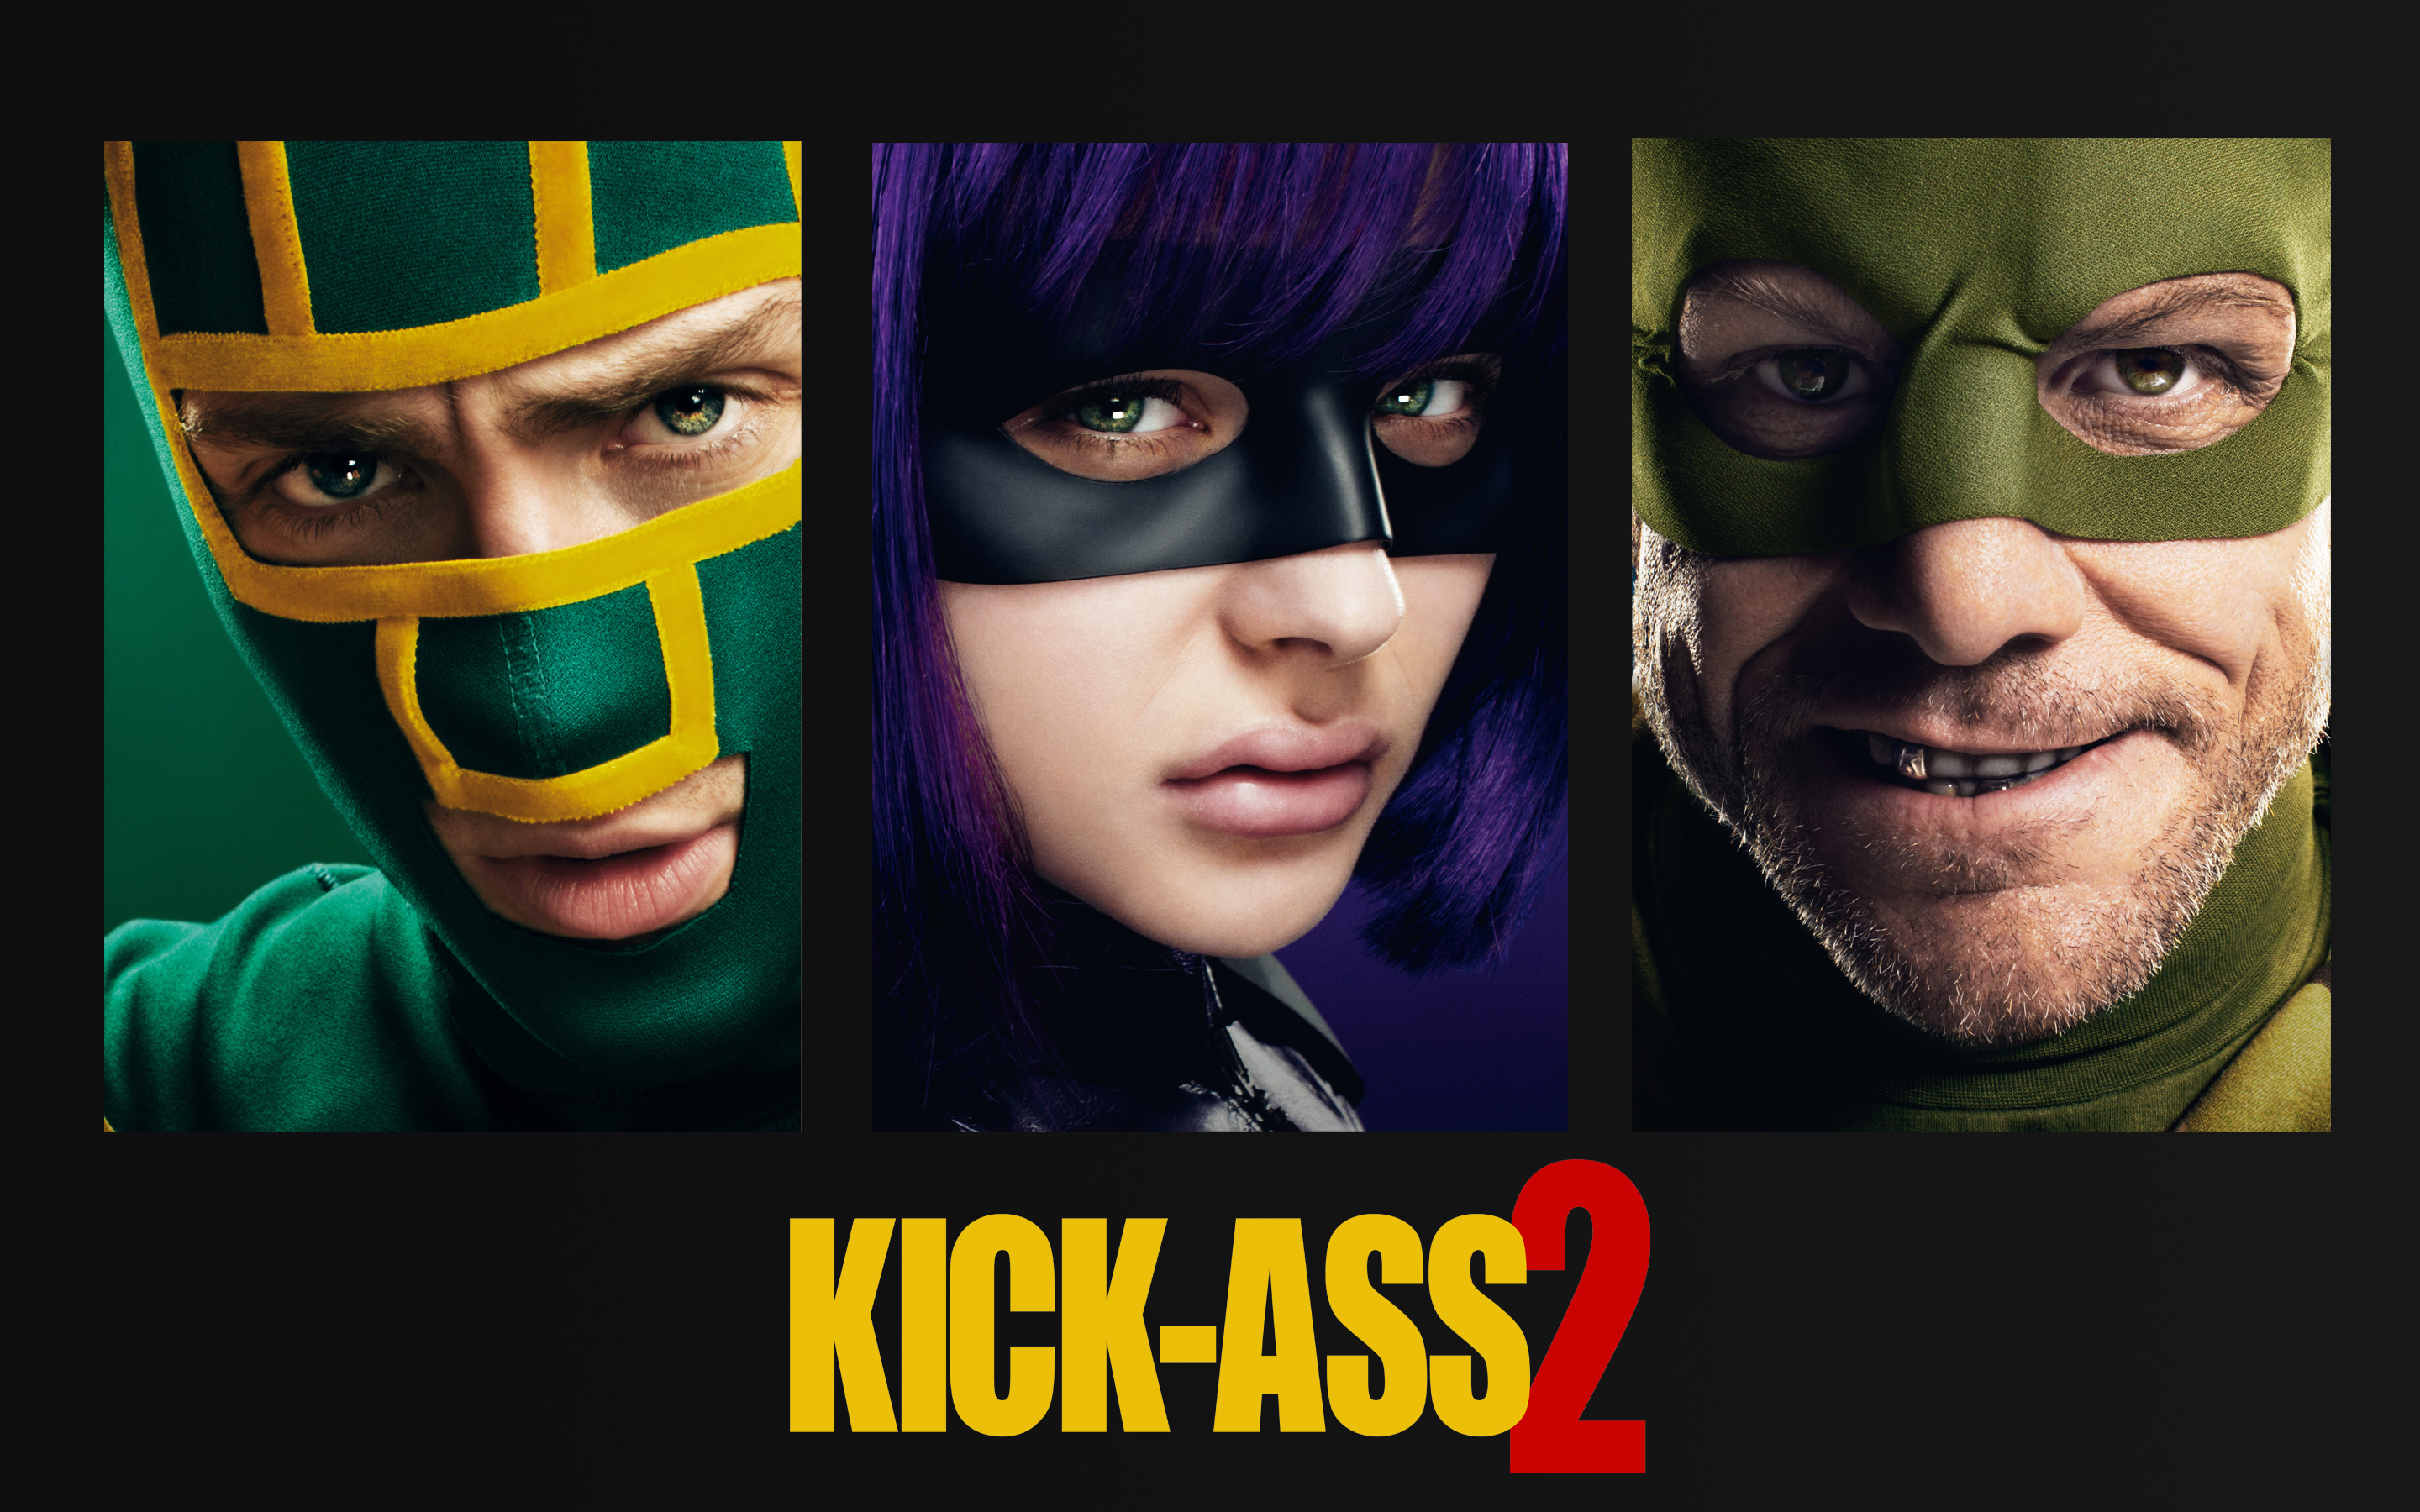 Amazing Kick-Ass 2 Pictures & Backgrounds